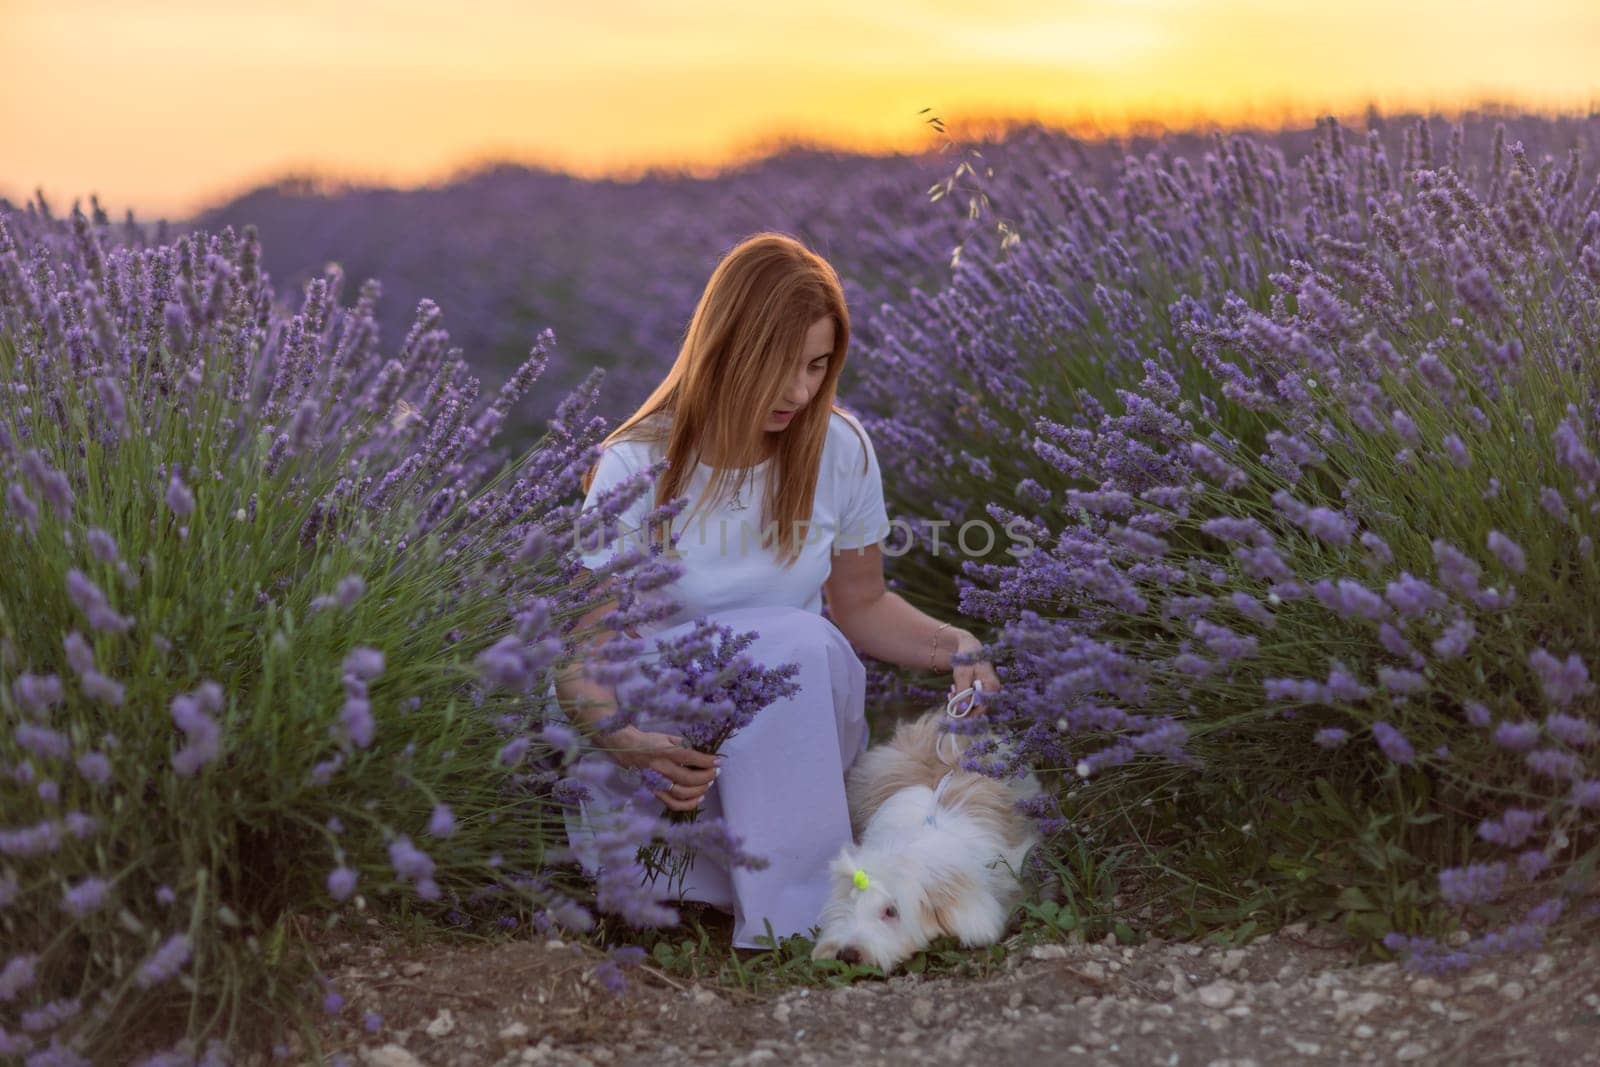 A woman sits in a field of lavender flowers with a dog by her side. The scene is peaceful and serene, with the woman and her dog enjoying the beauty of the flowers and the calming atmosphere